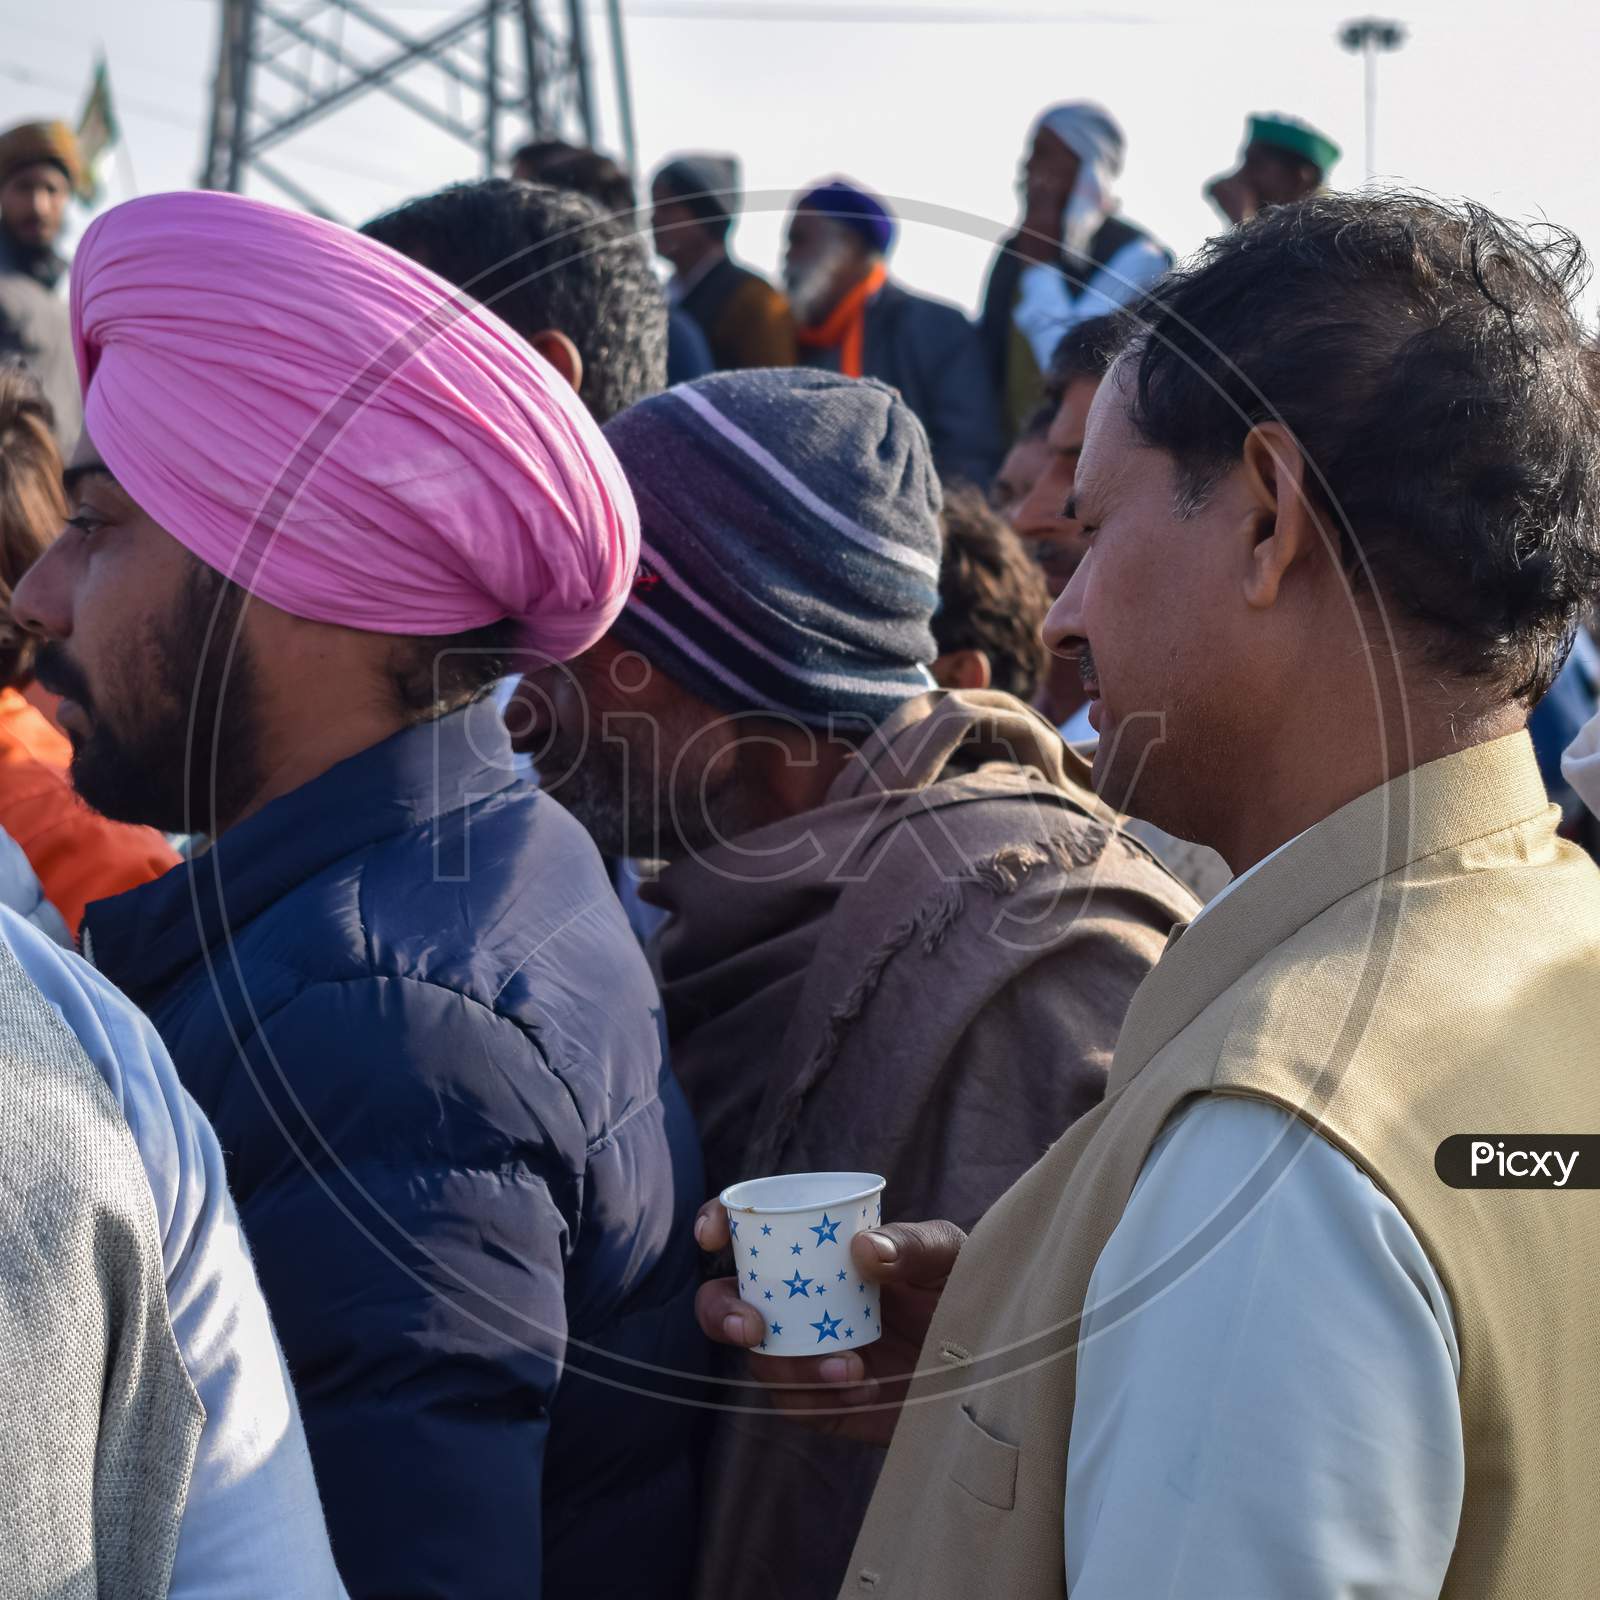 New Delhi, India – December 25 2020 : Indian Sikh And Hindu Farmers From Punjab, Uttar Pradesh And Uttarakhand States Protests At Delhi-Up Border. Farmers Are Protesting Against The New Farmer Laws